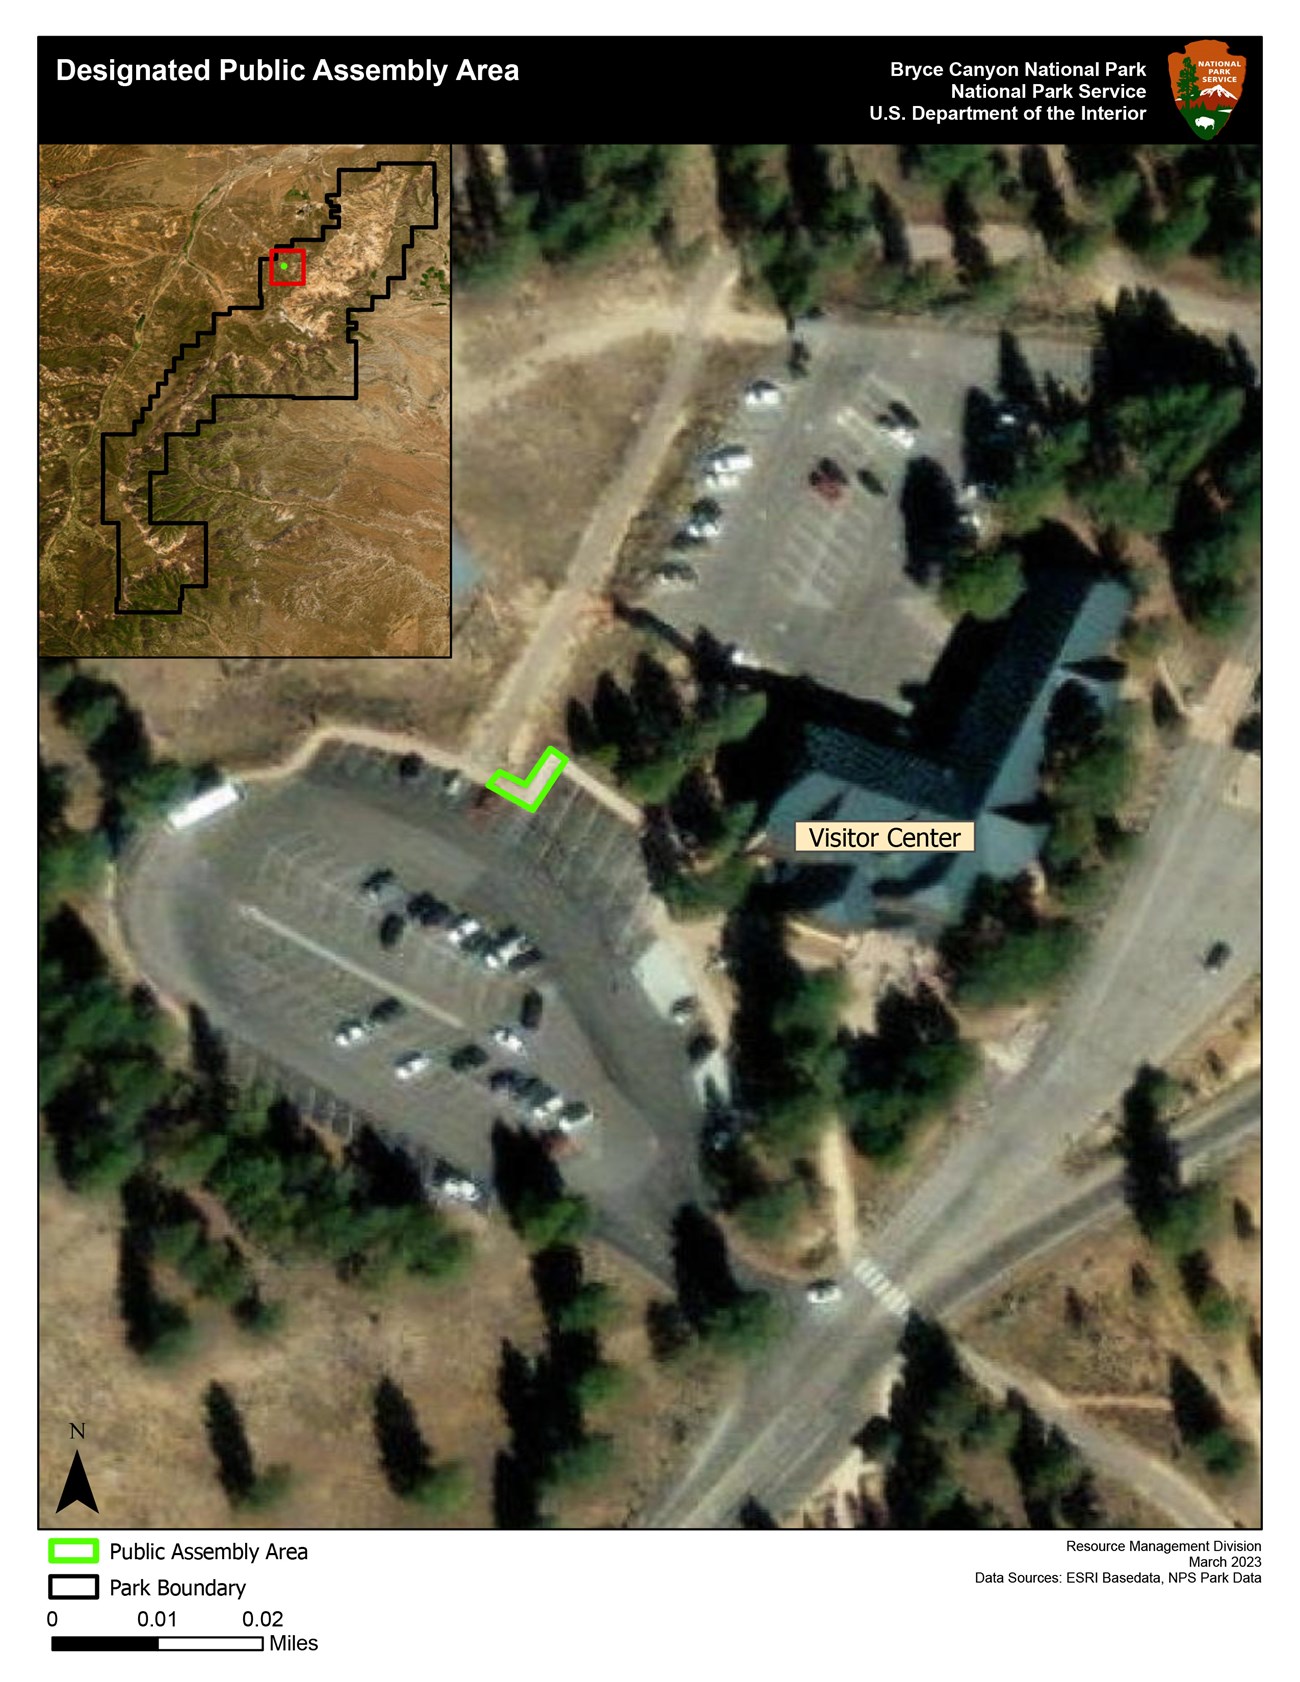 Aerial view of the visitor center area with the public assembly area outlined in green. An inset map on the upper left shows this area in relation to the entire park.